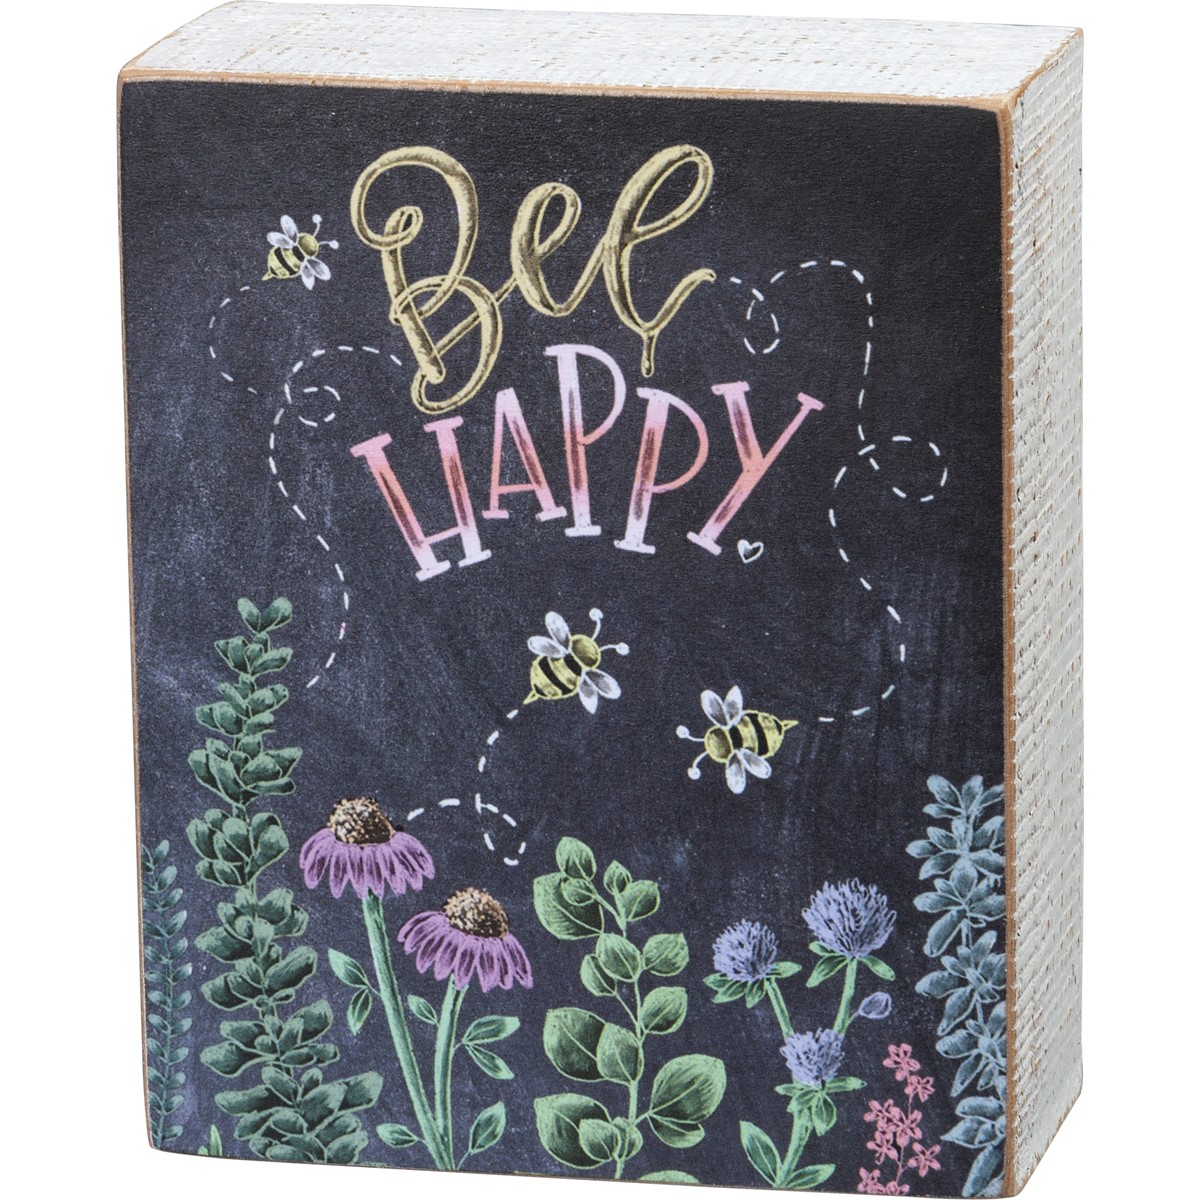 Bee Happy Chalk Sign - Wood, Paper